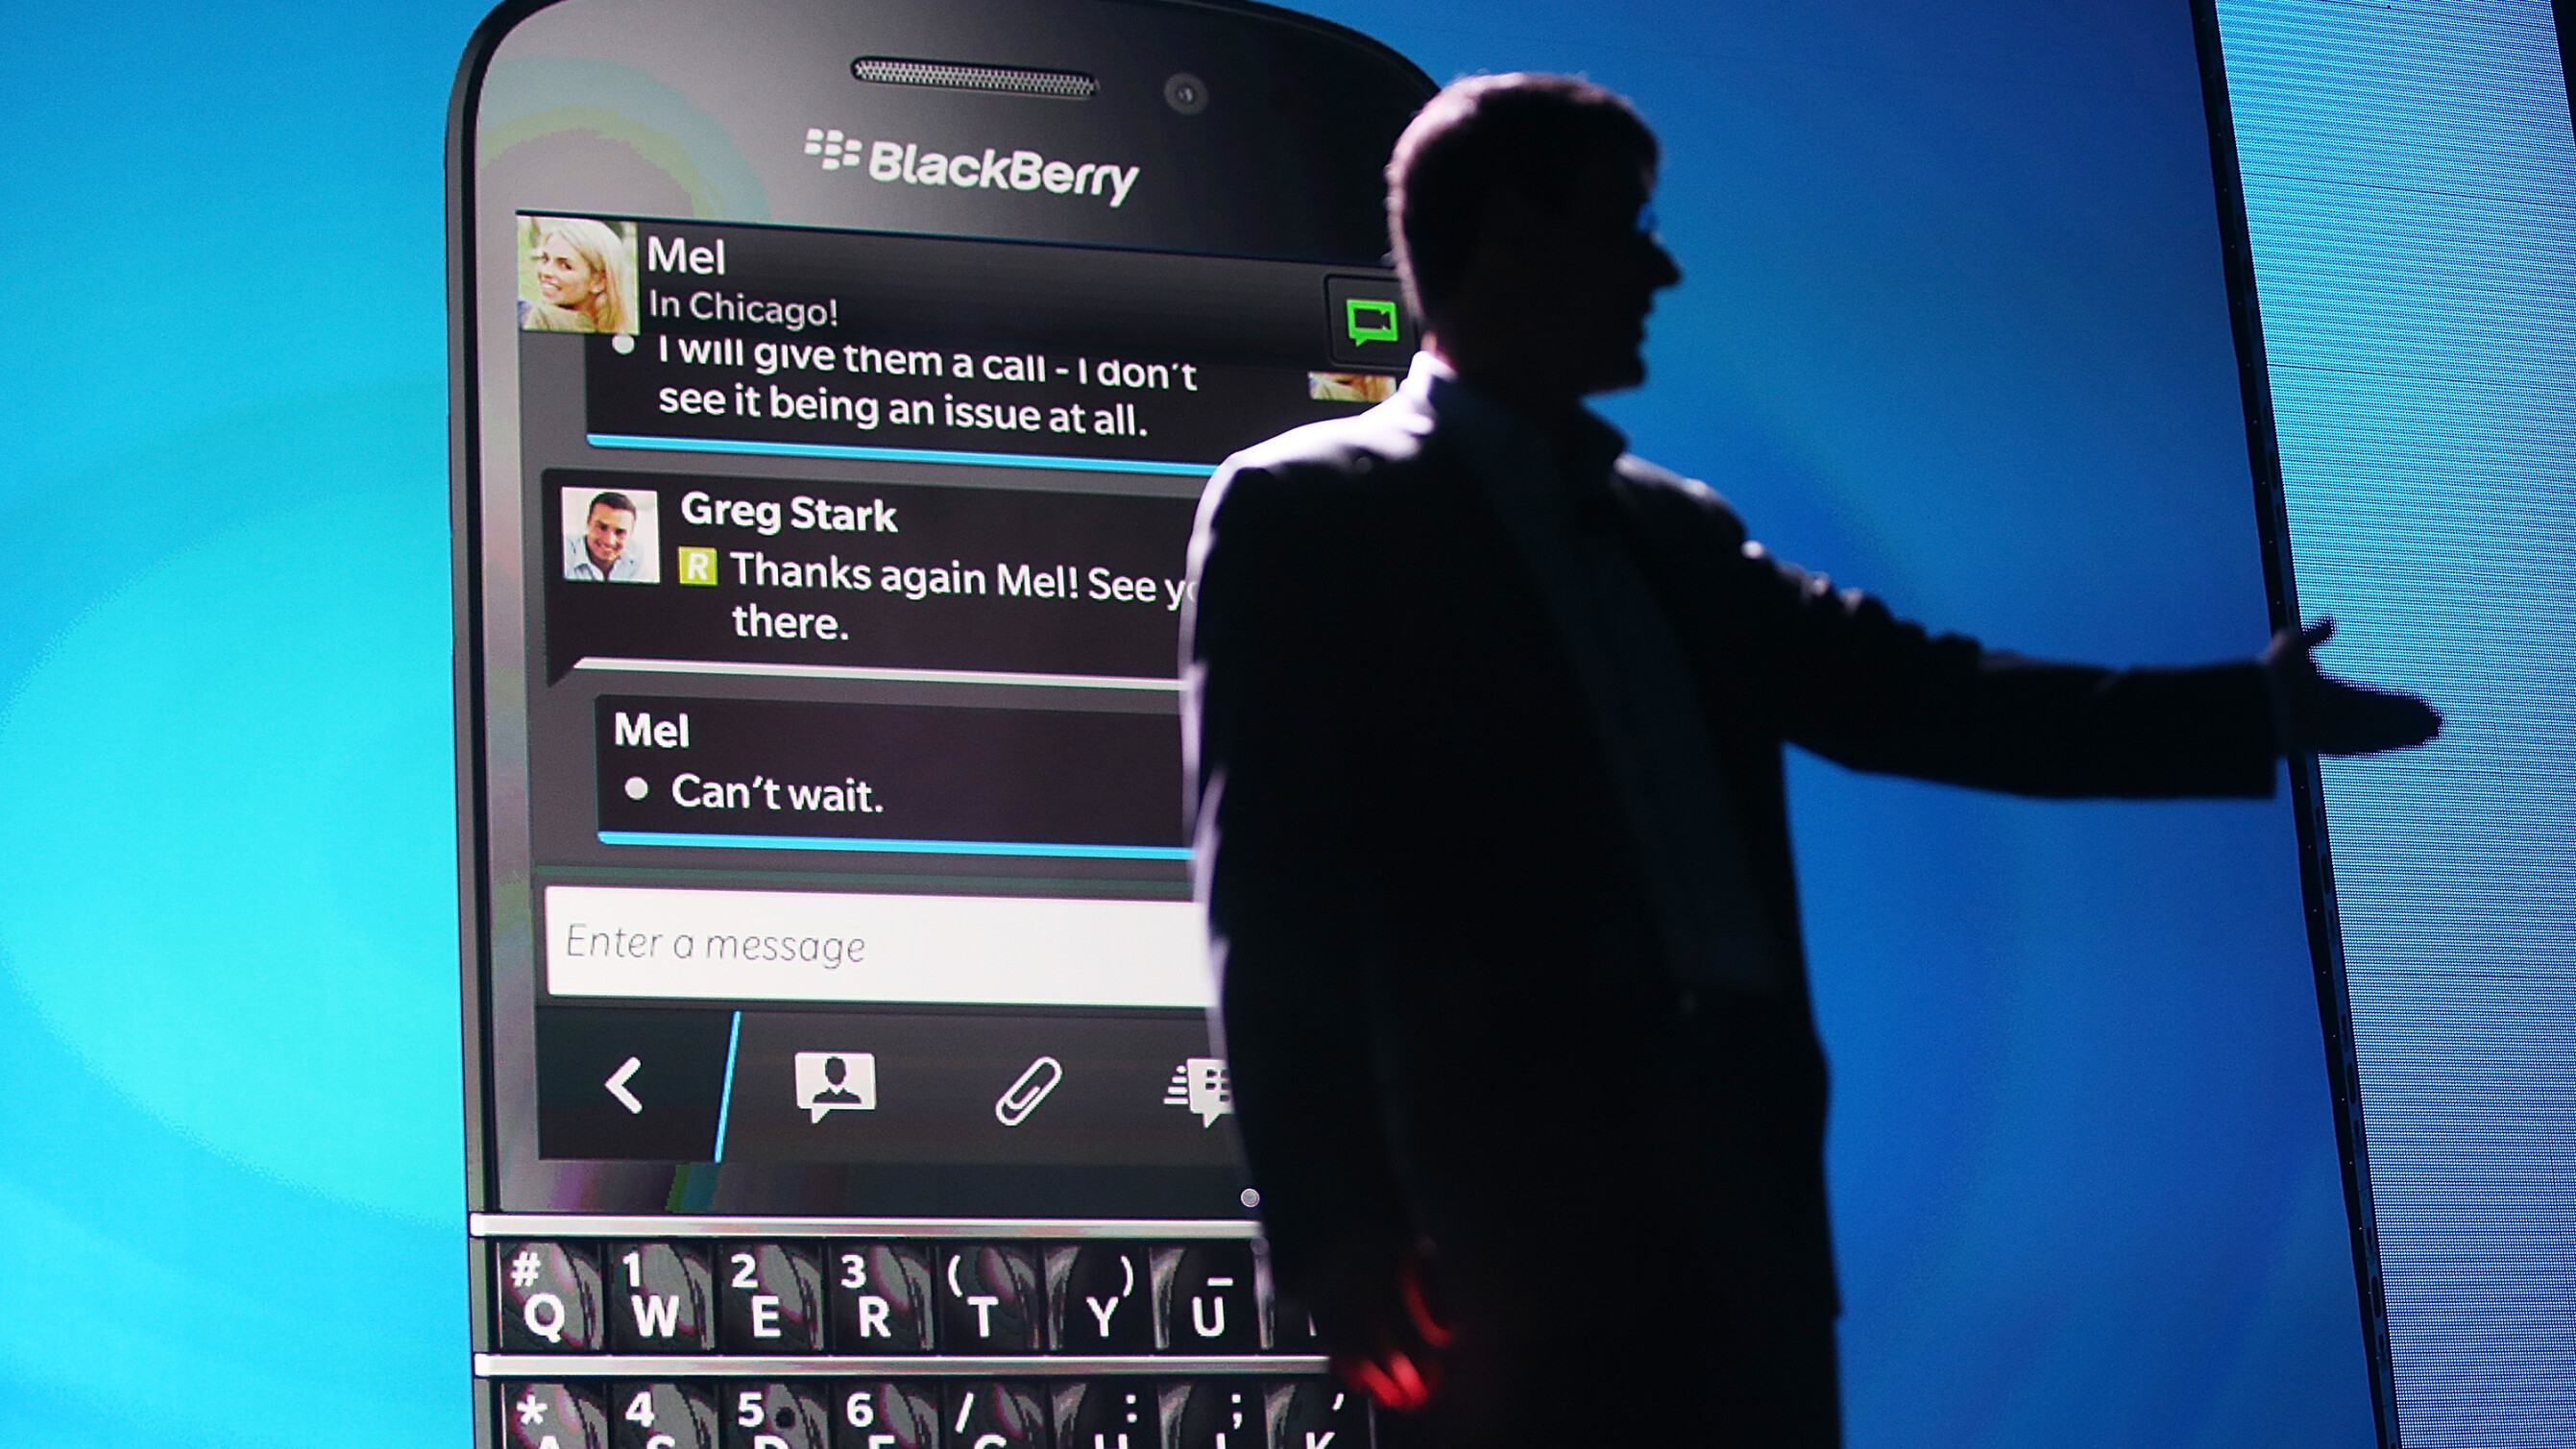 BlackBerry sues Ryan Seacrest’s Typo over ‘blatantly copied’ iPhone keyboard case [Update]